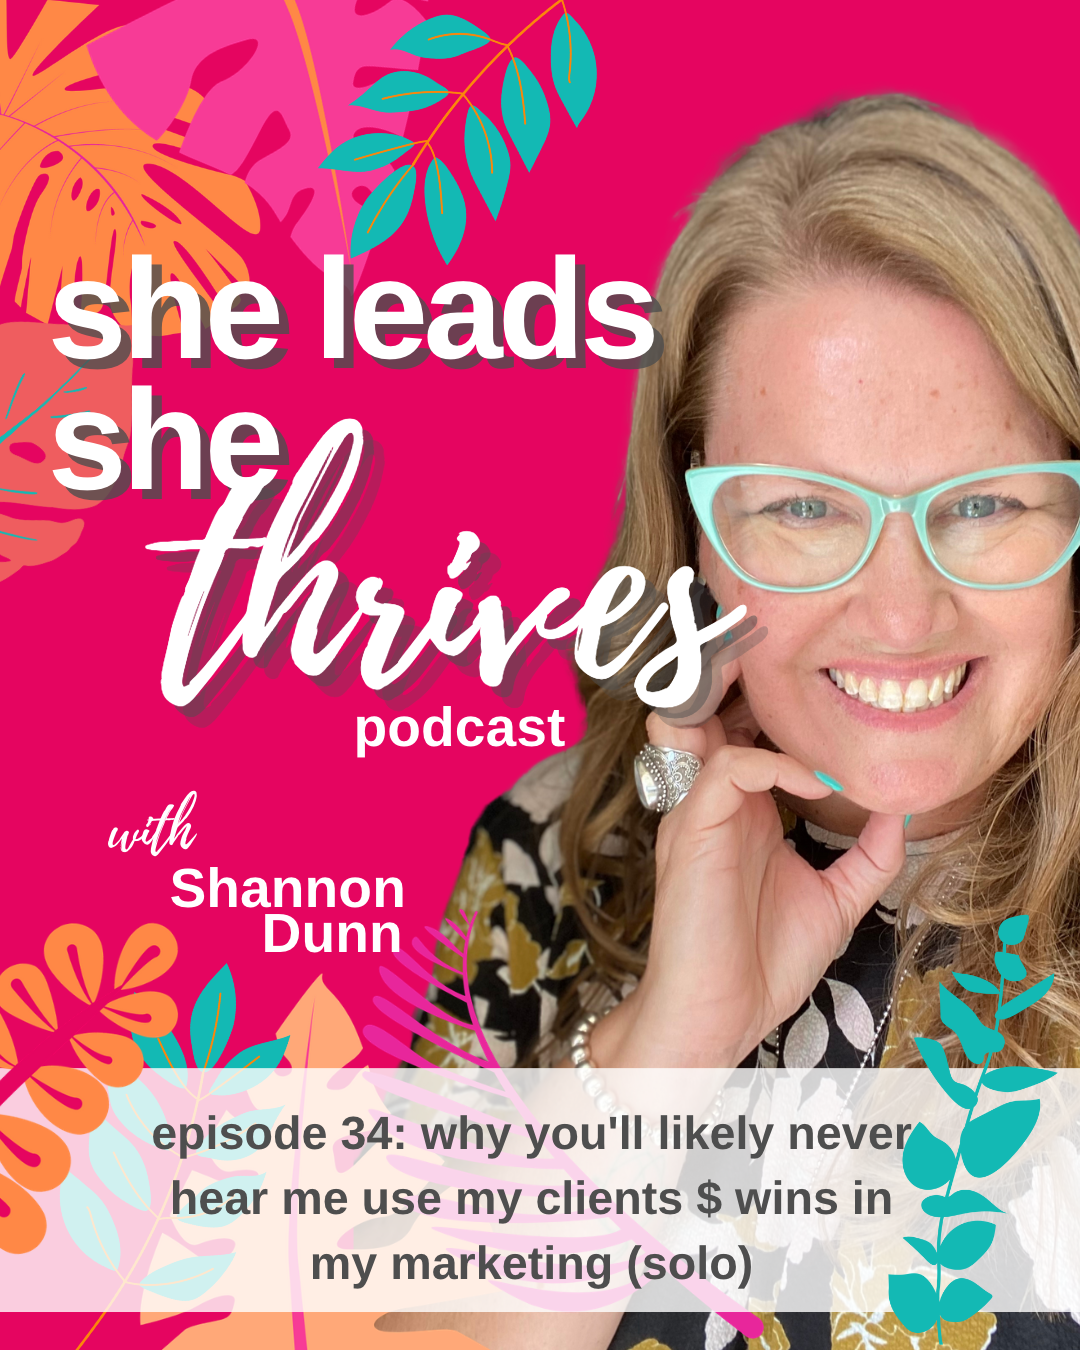 She Leads She Thrives Podcast | Episode 34 | why you'll likely never hear me use client money wins marketing | Business coach Perth Australia | coaching women | Thrive Factor Archetypes | Shannon Dunn